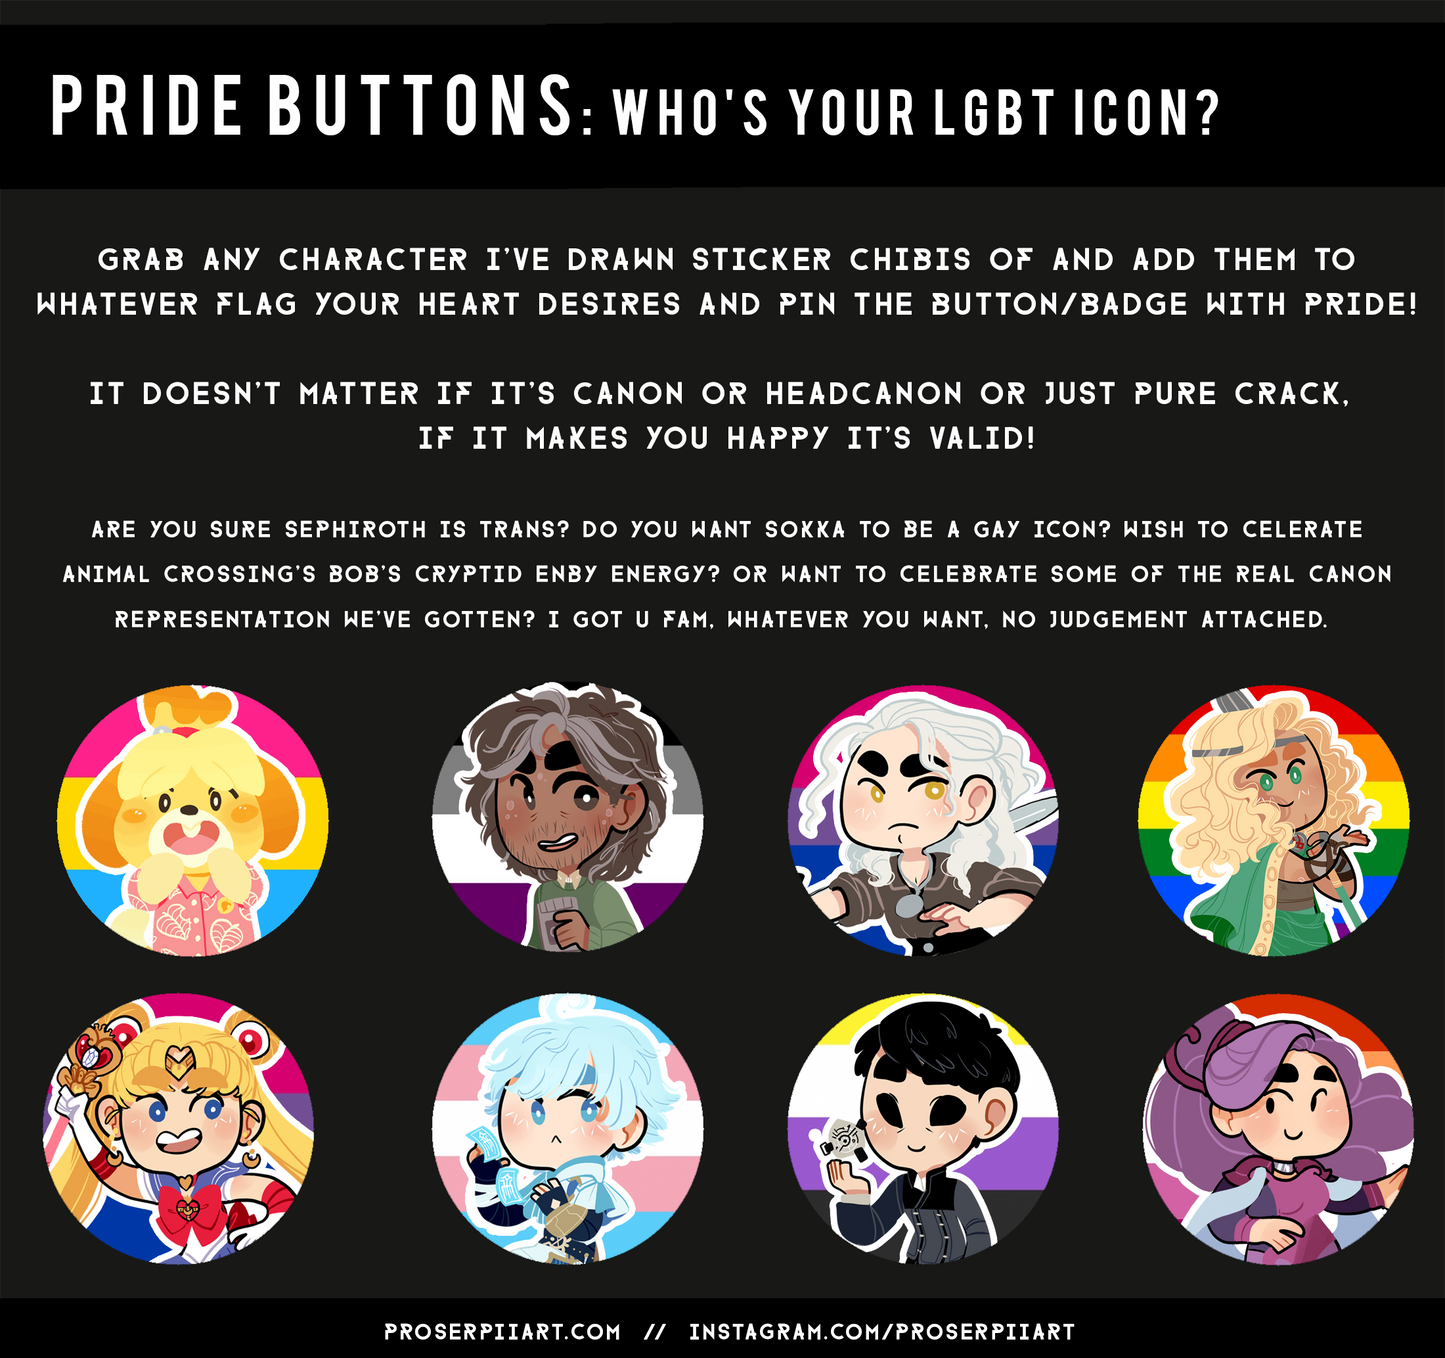 Build-A-Pride-Button! 38mm / 1.5" LGBT+ buttons with any character available in my shop <3